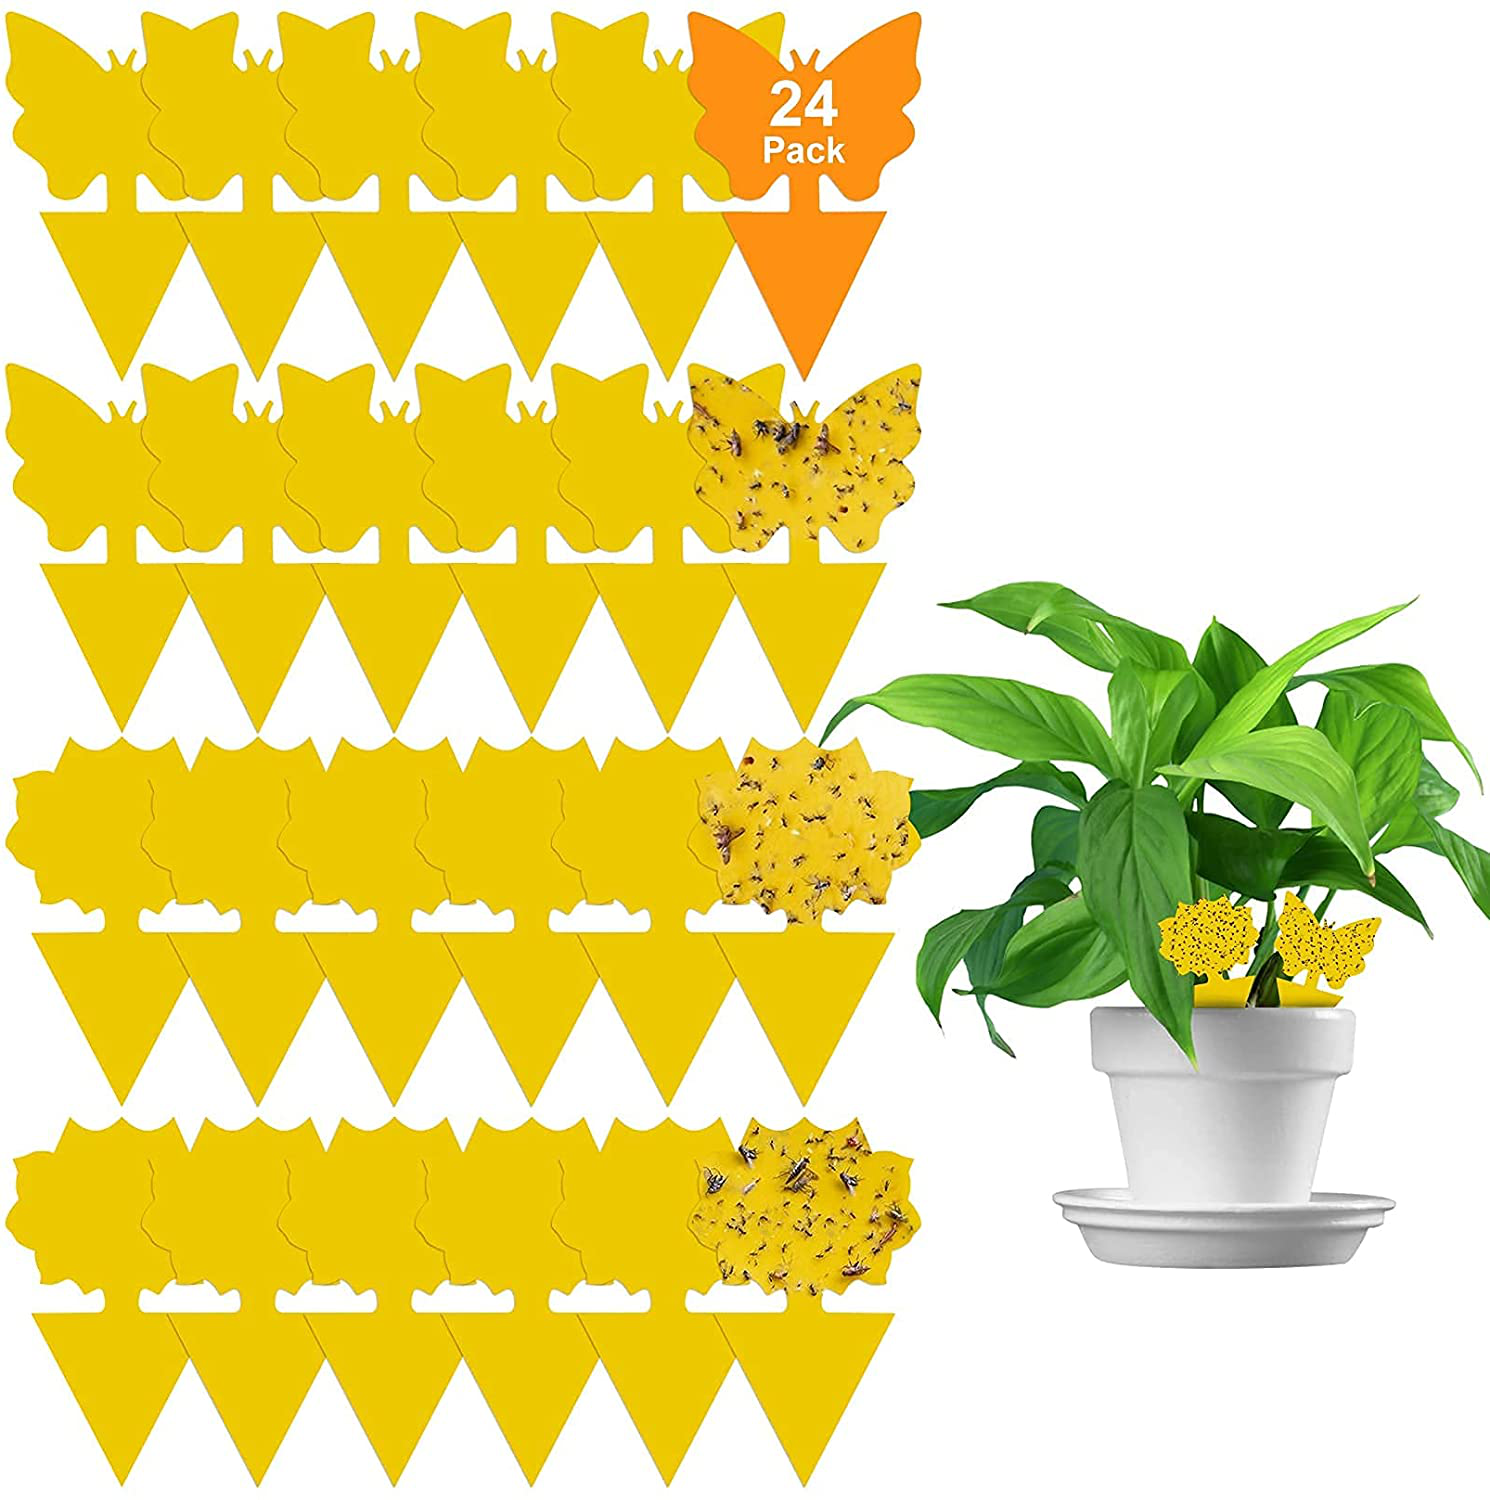 36 Pack Yellow Sticky Traps and Fungus Gnat Traps Killer for Indoor Outdoor, Fruit Fly Traps Protect The Plants